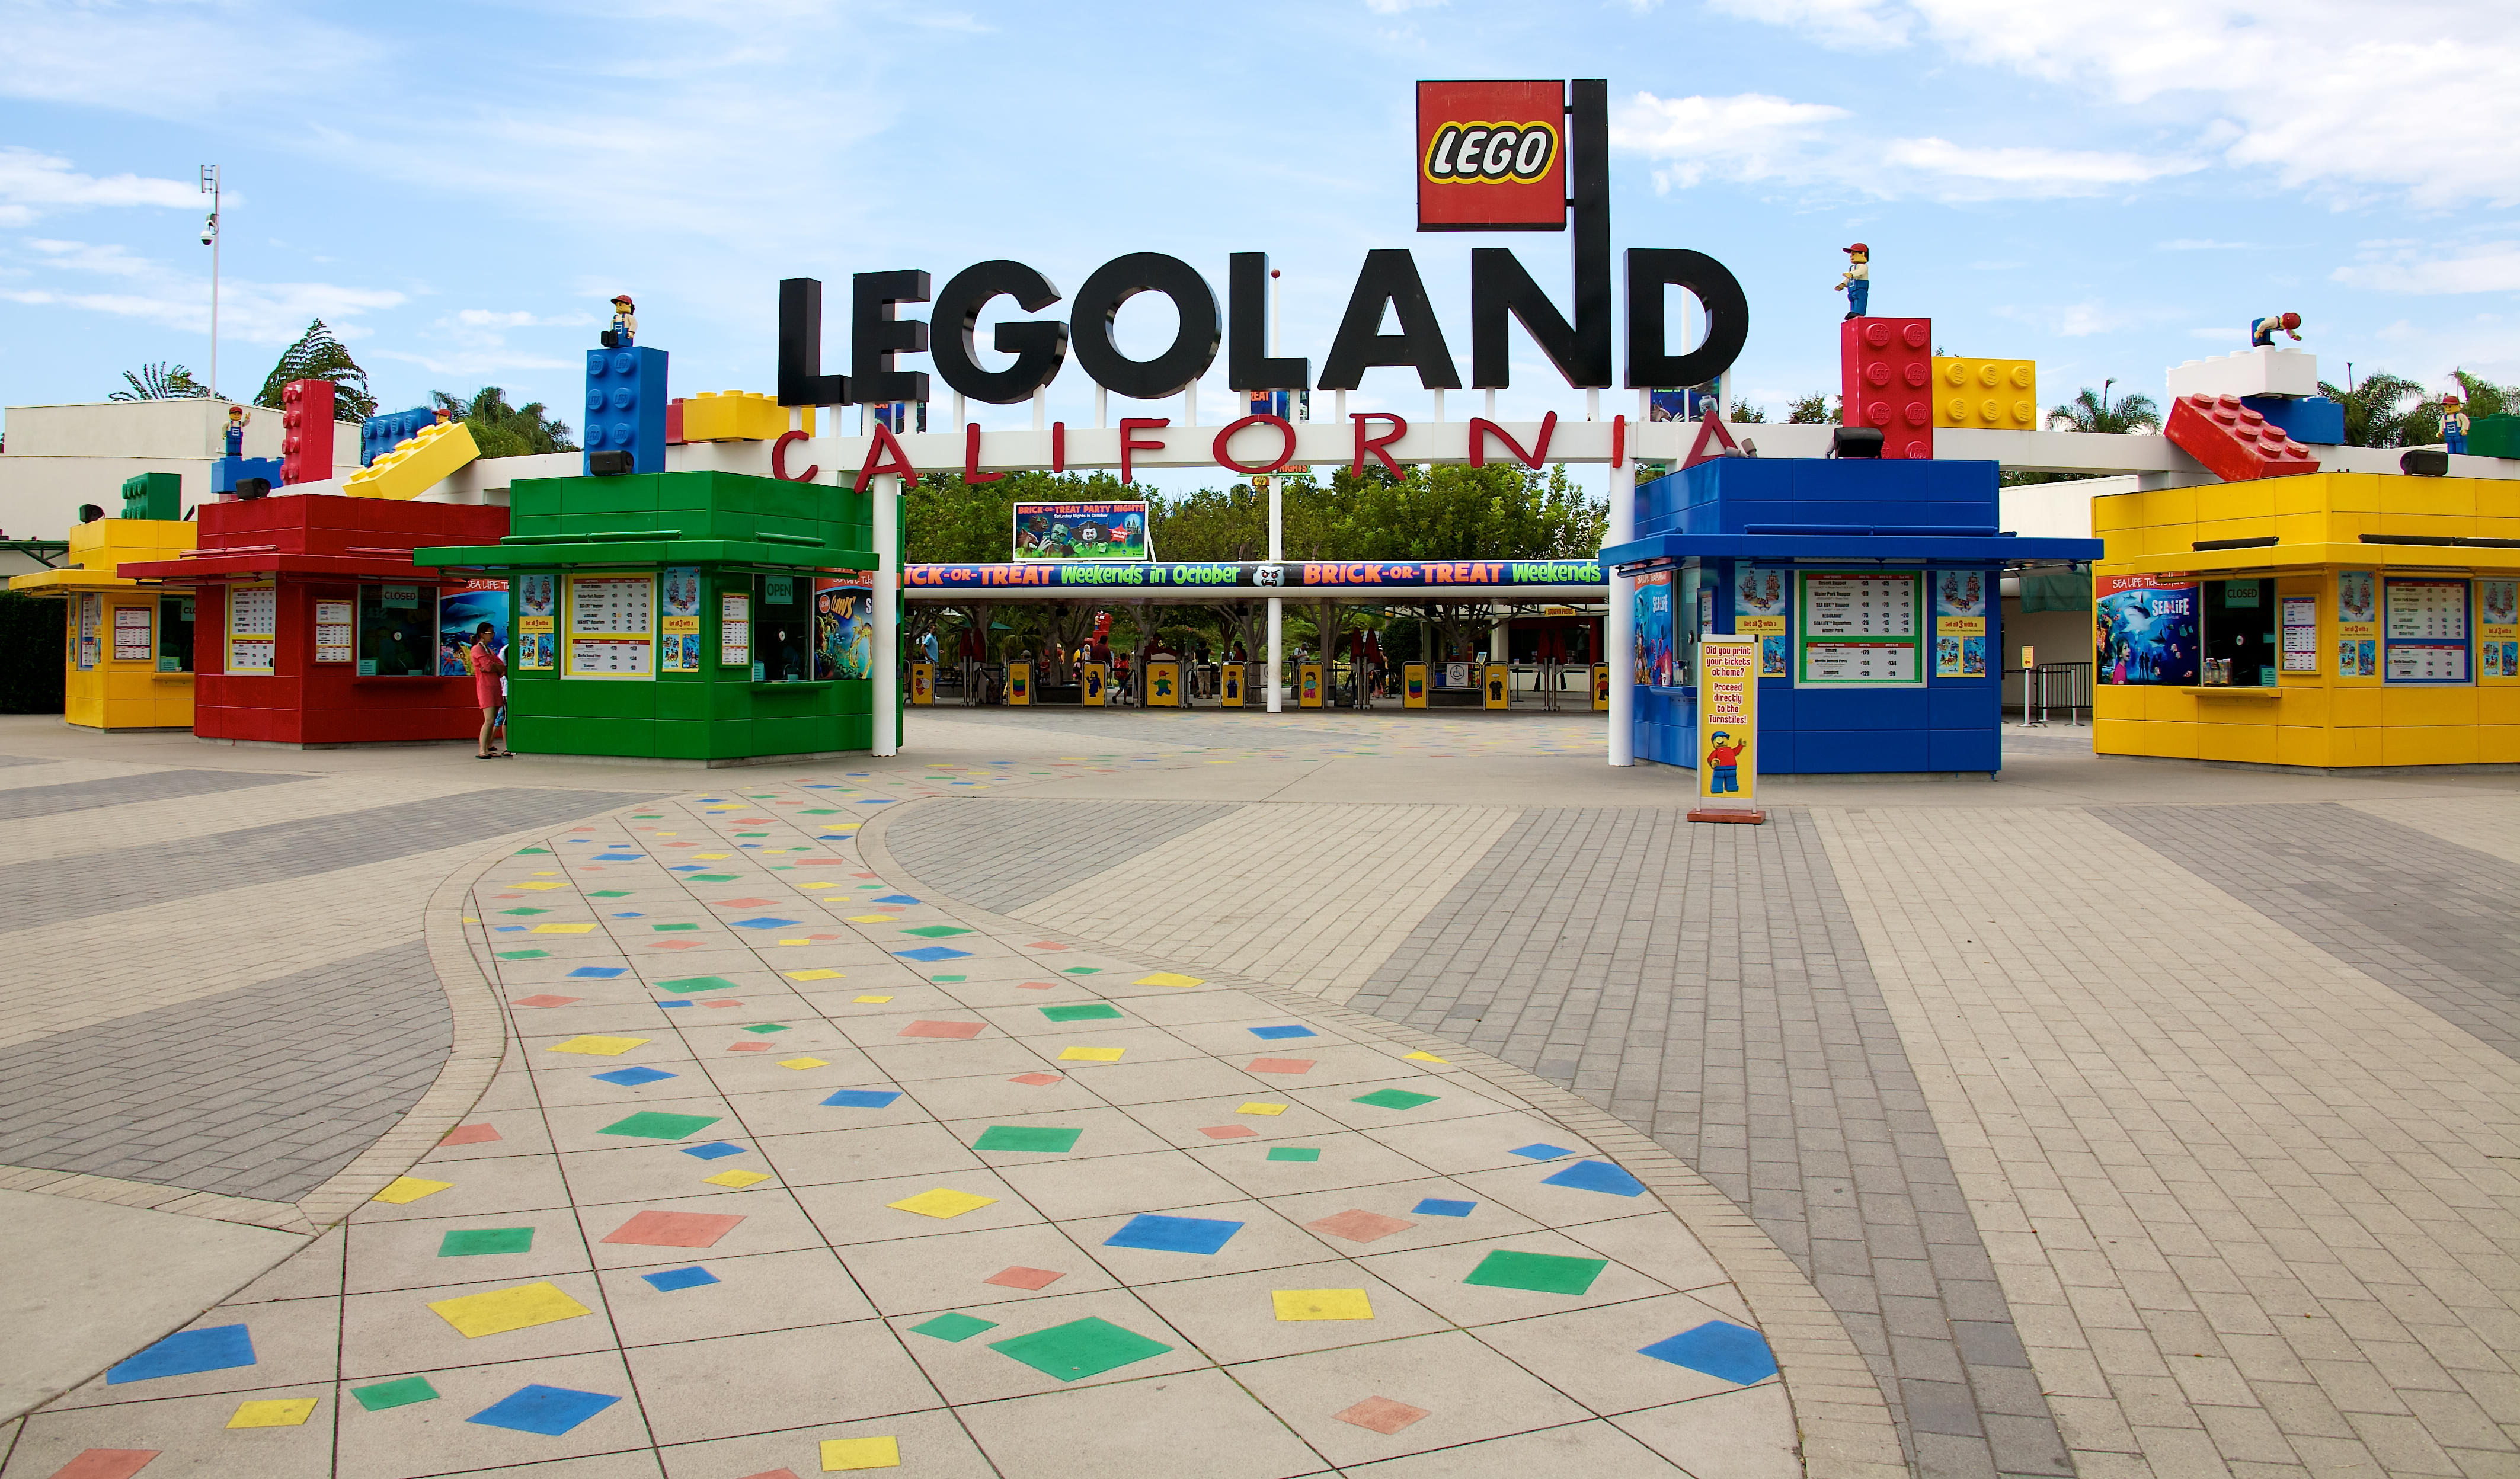 Visit Legoland California and enjoy a fun family day out